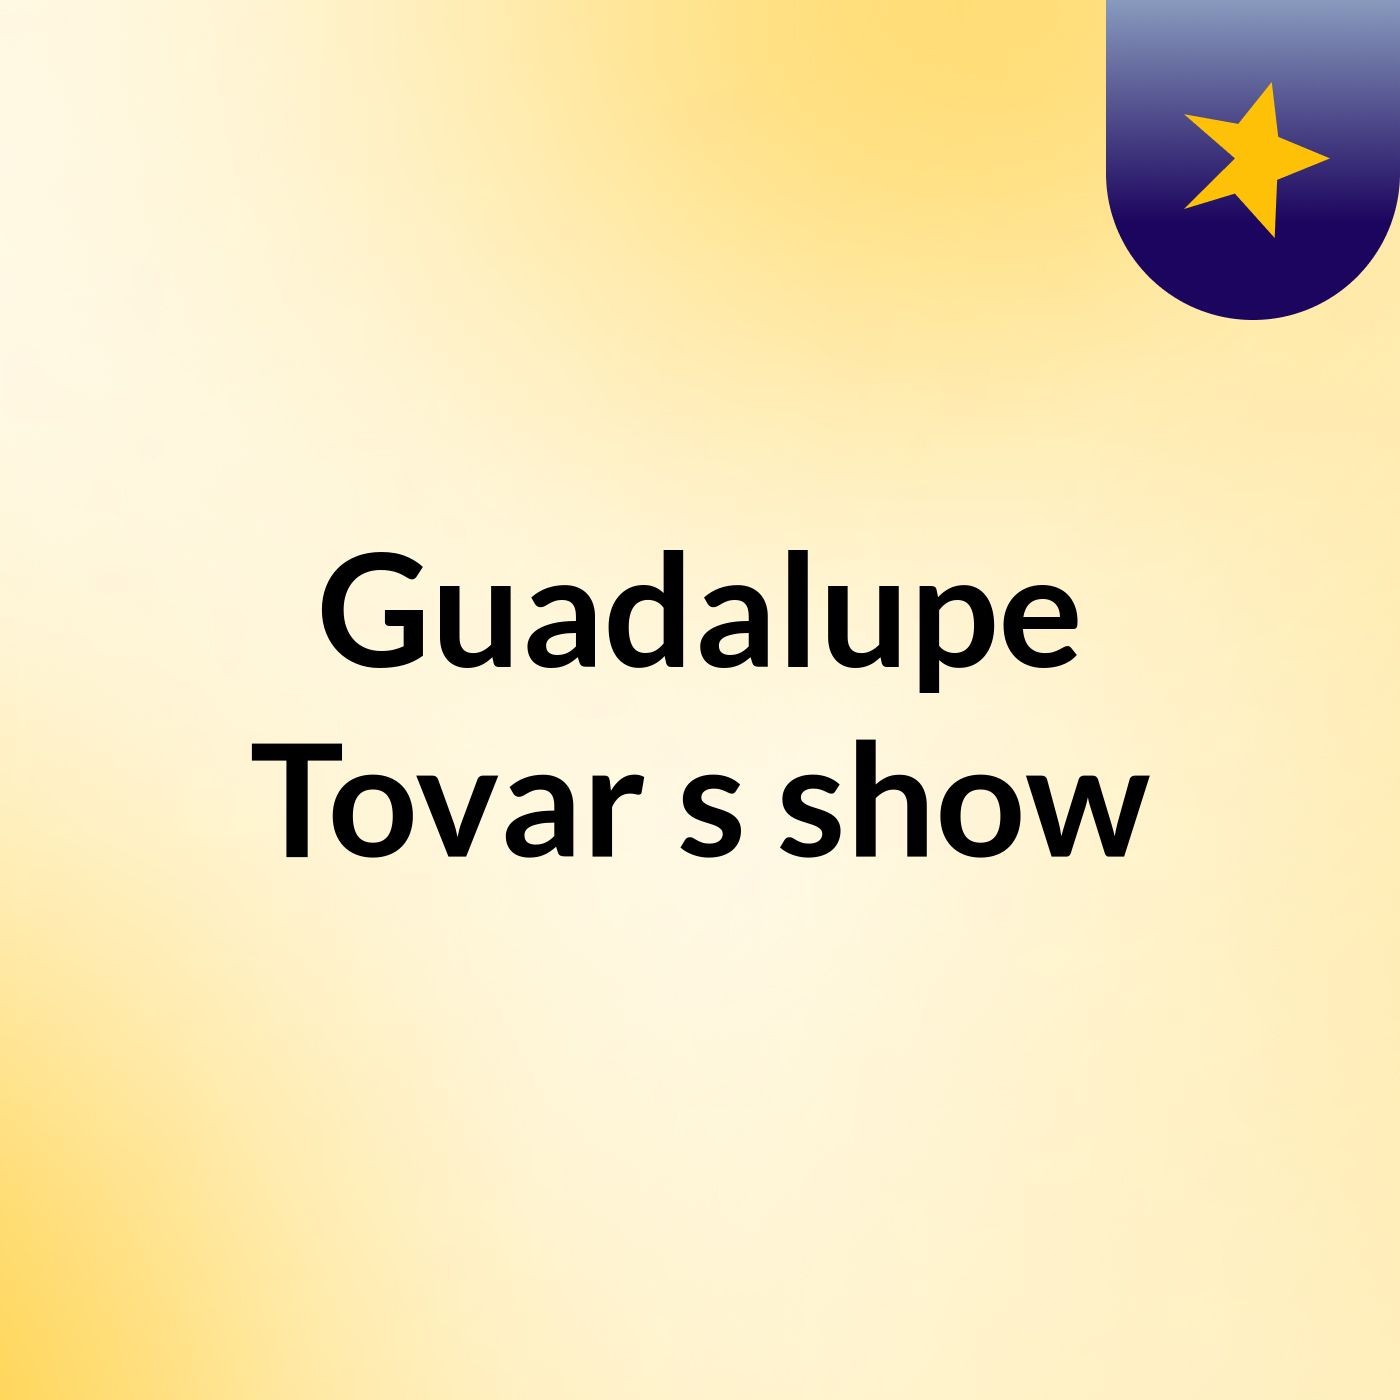 Guadalupe Tovar's show